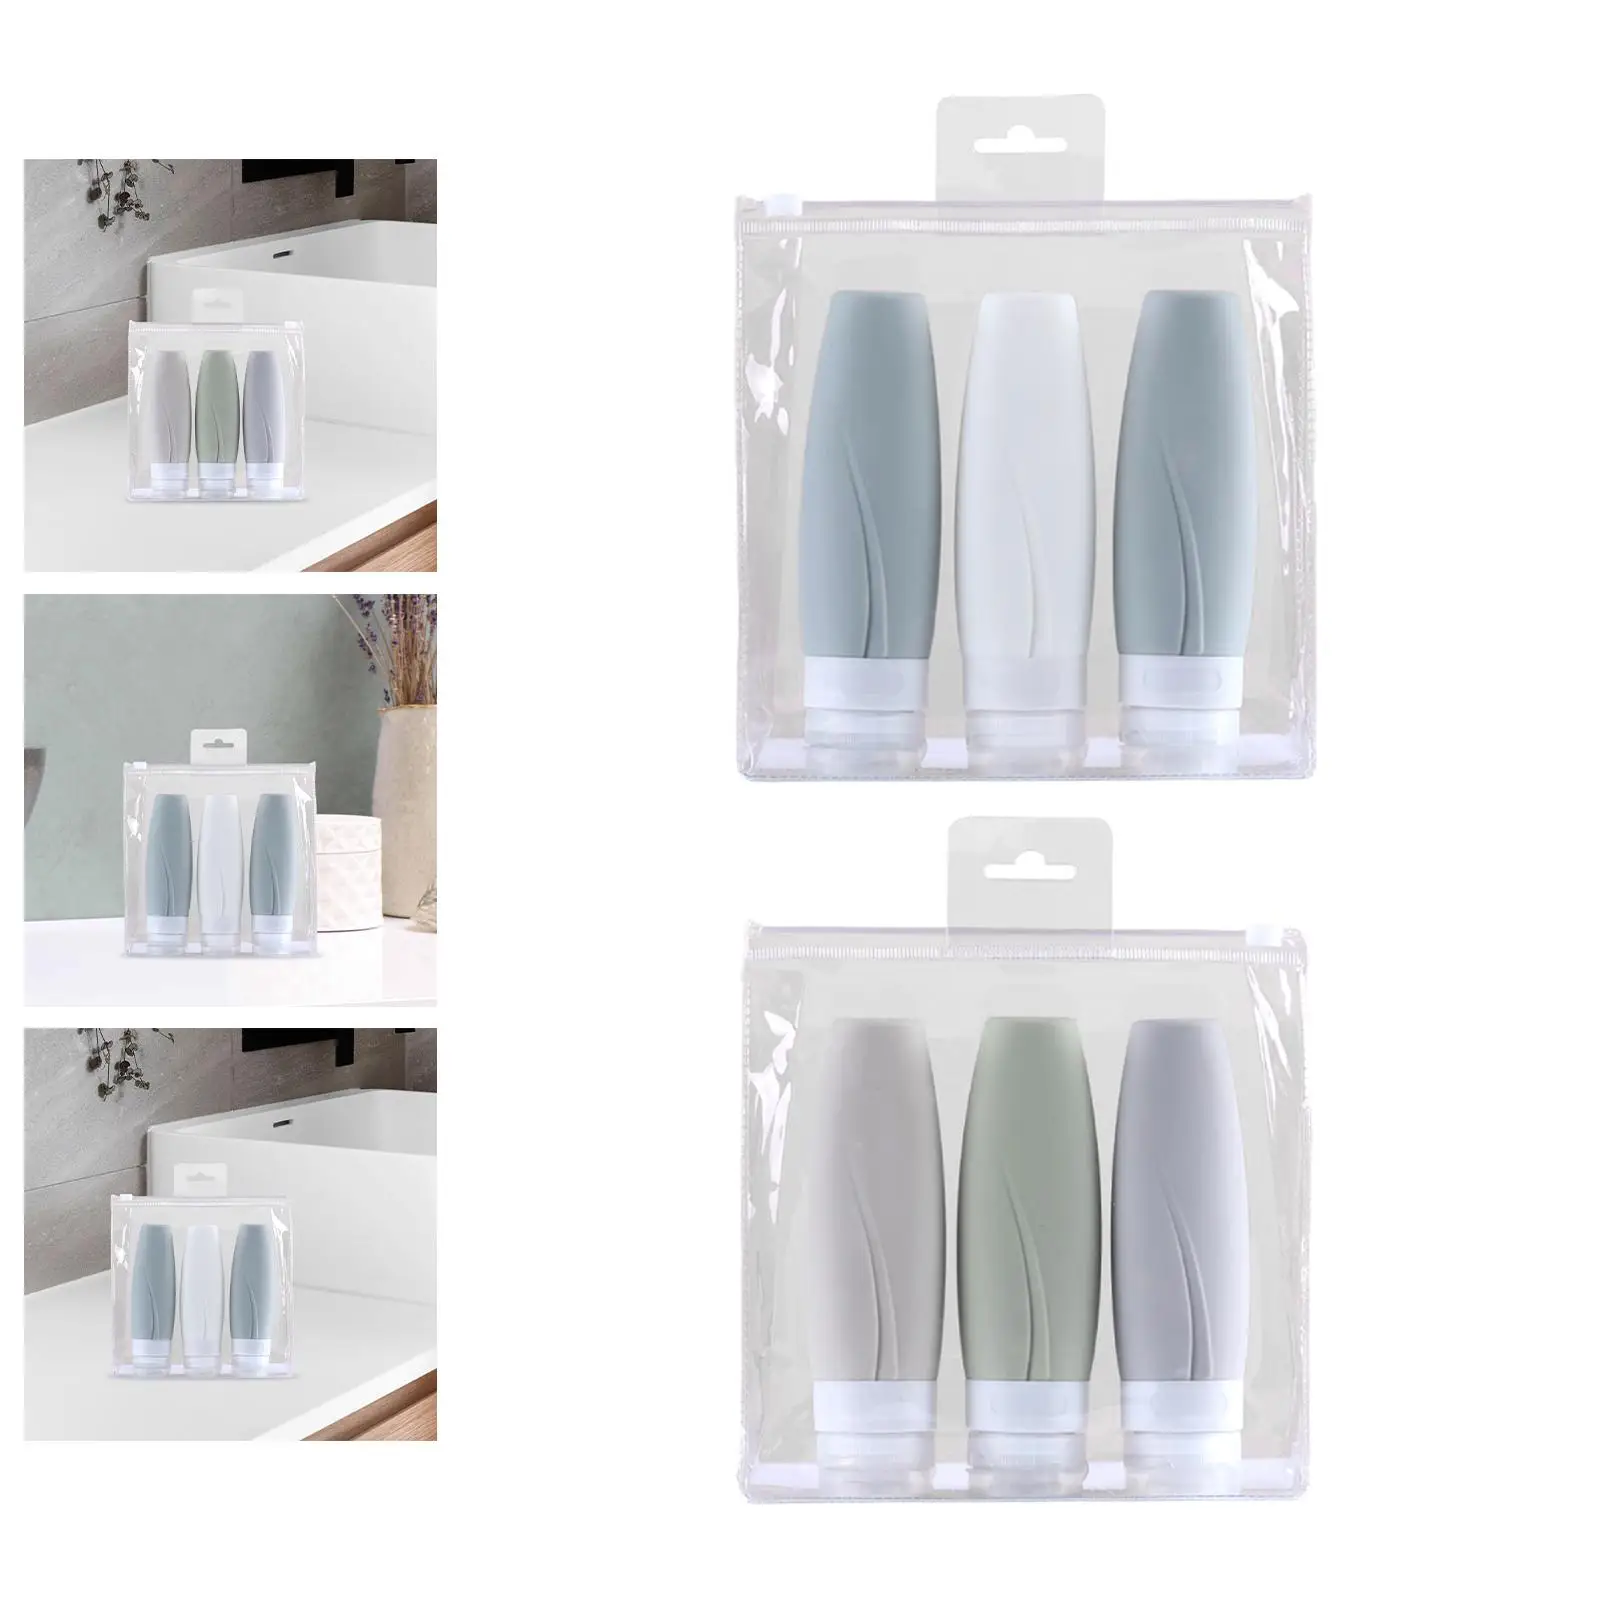 3x Travel Bottles Empty Toiletry Container for Conditioner Shampoo Men Women